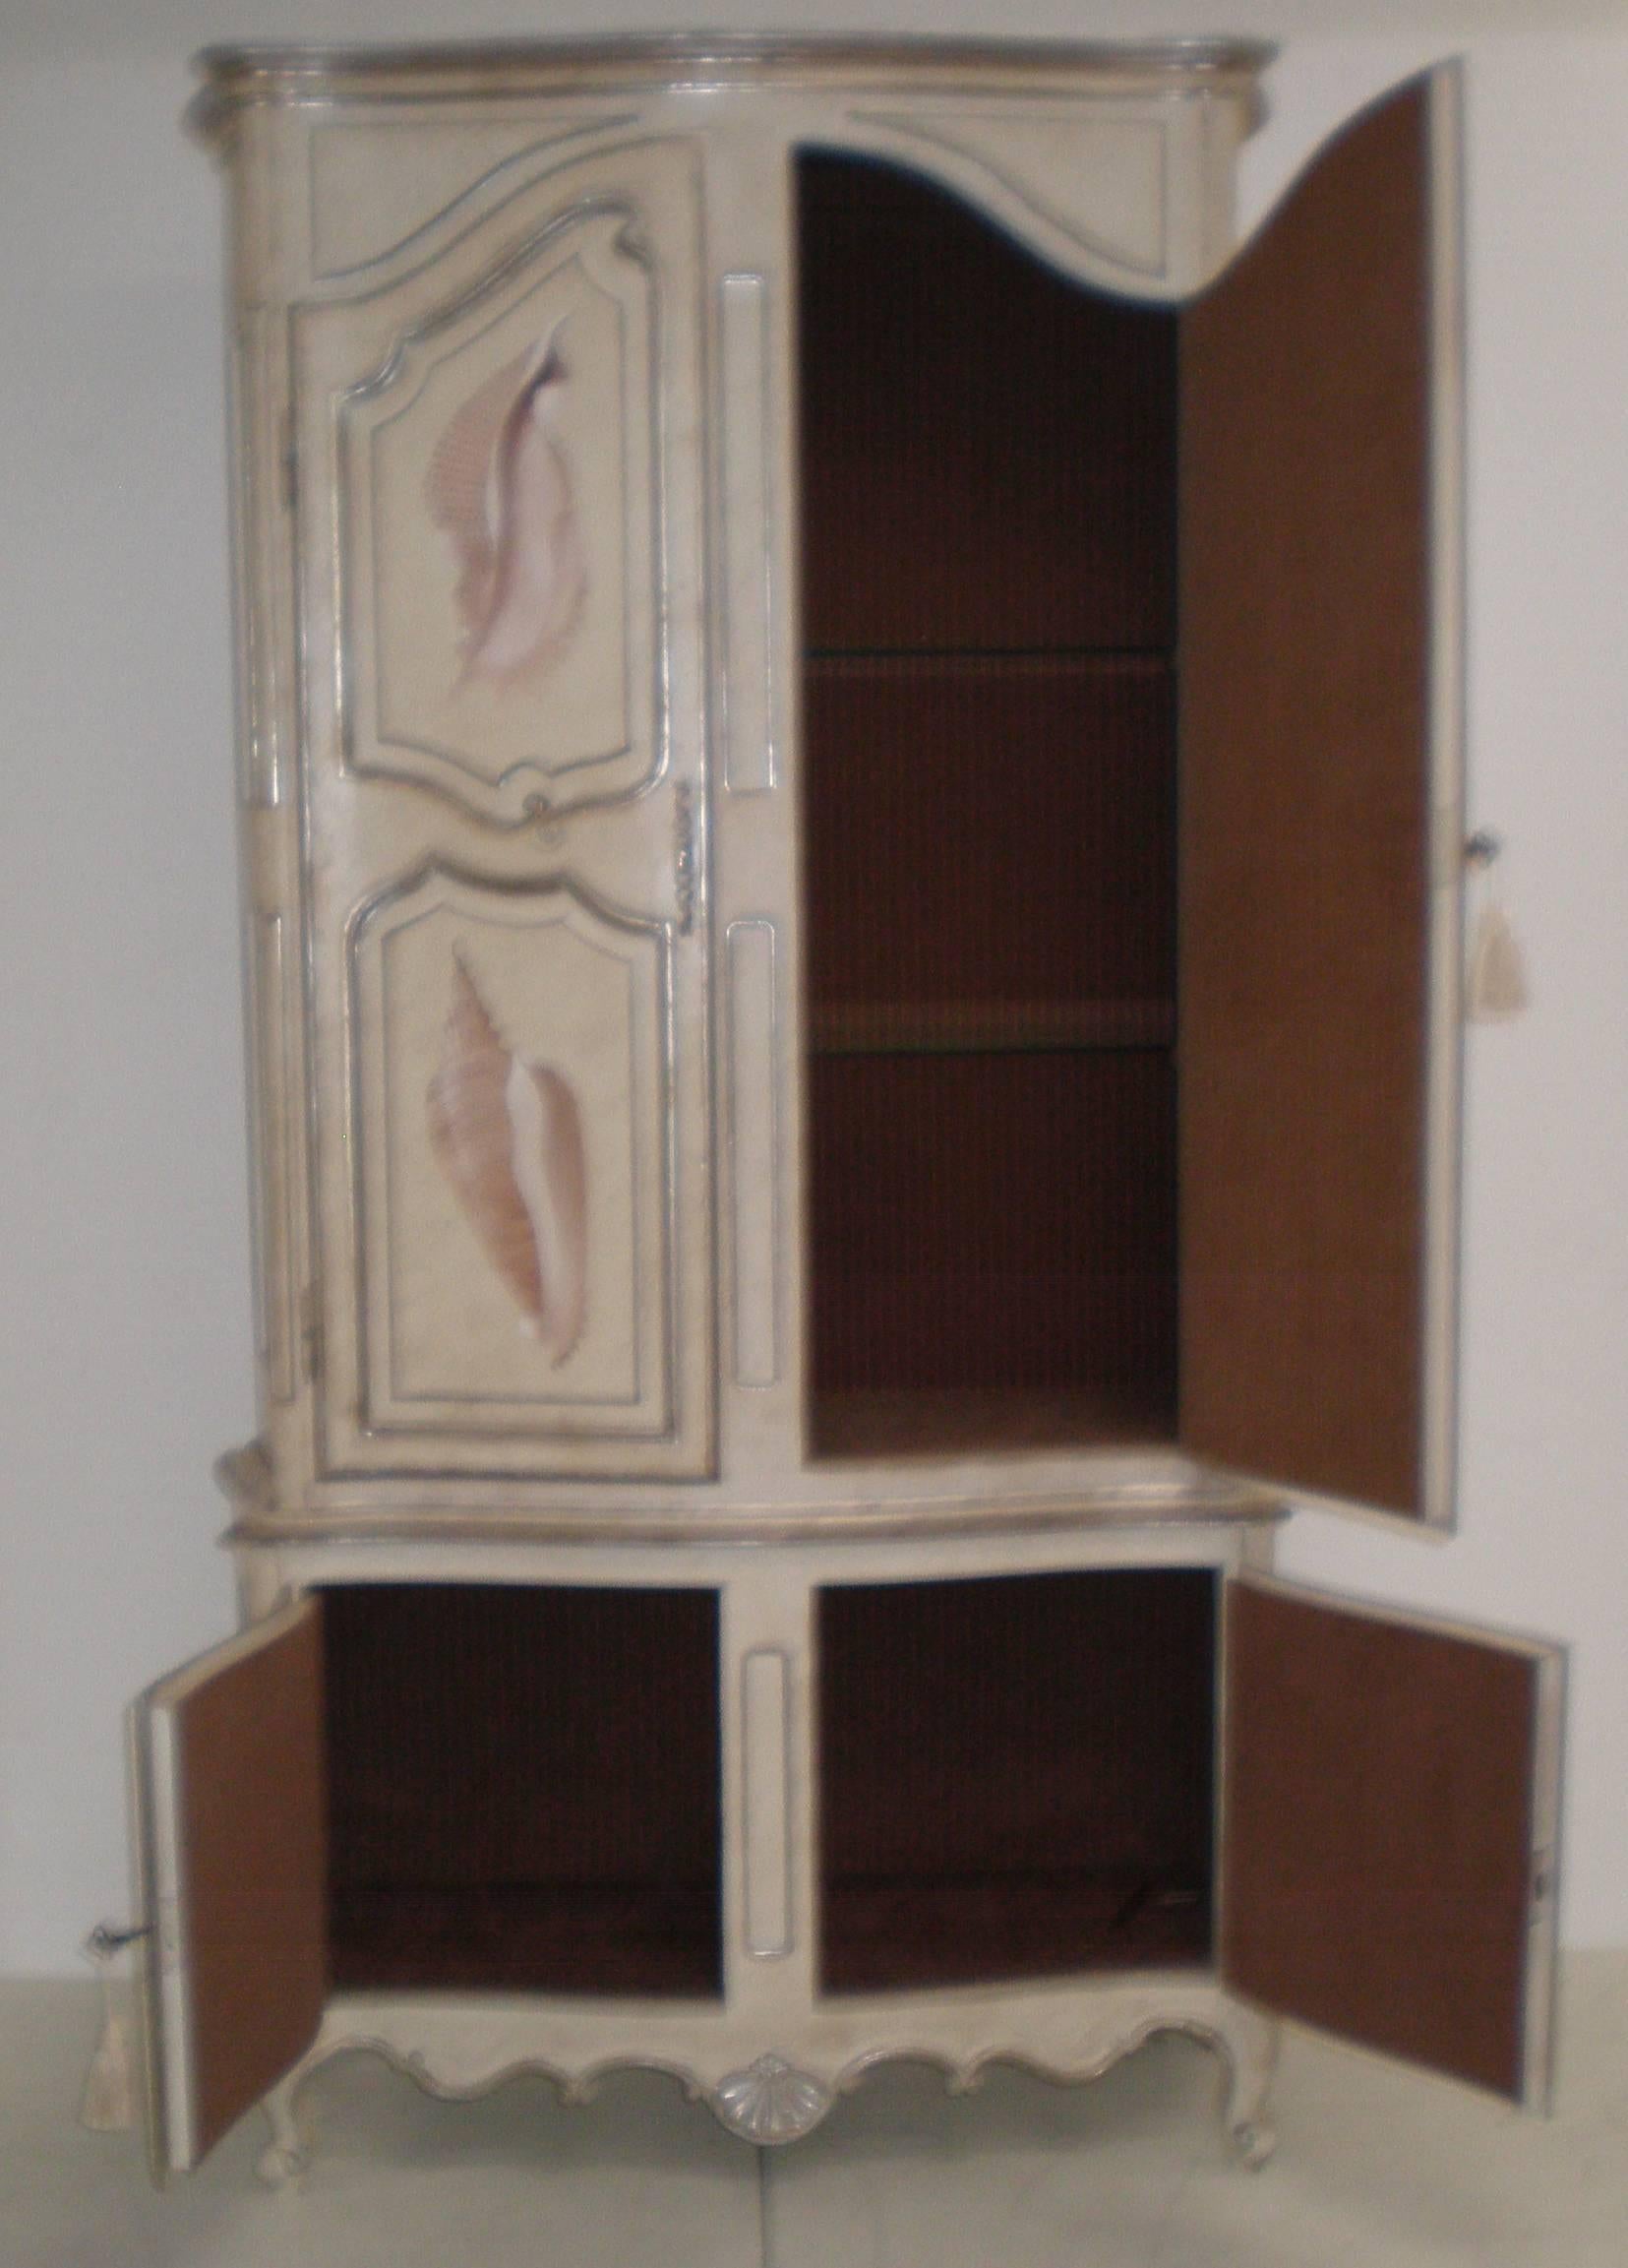 Custom-made, original painting of unique assorted shells by listed artist, Lucien Horton, this tall four-door, two-piece cabinet is lined in brown ribbed fabric and illuminates with hidden light bulbs on the inside. Two glass shelves on top portion